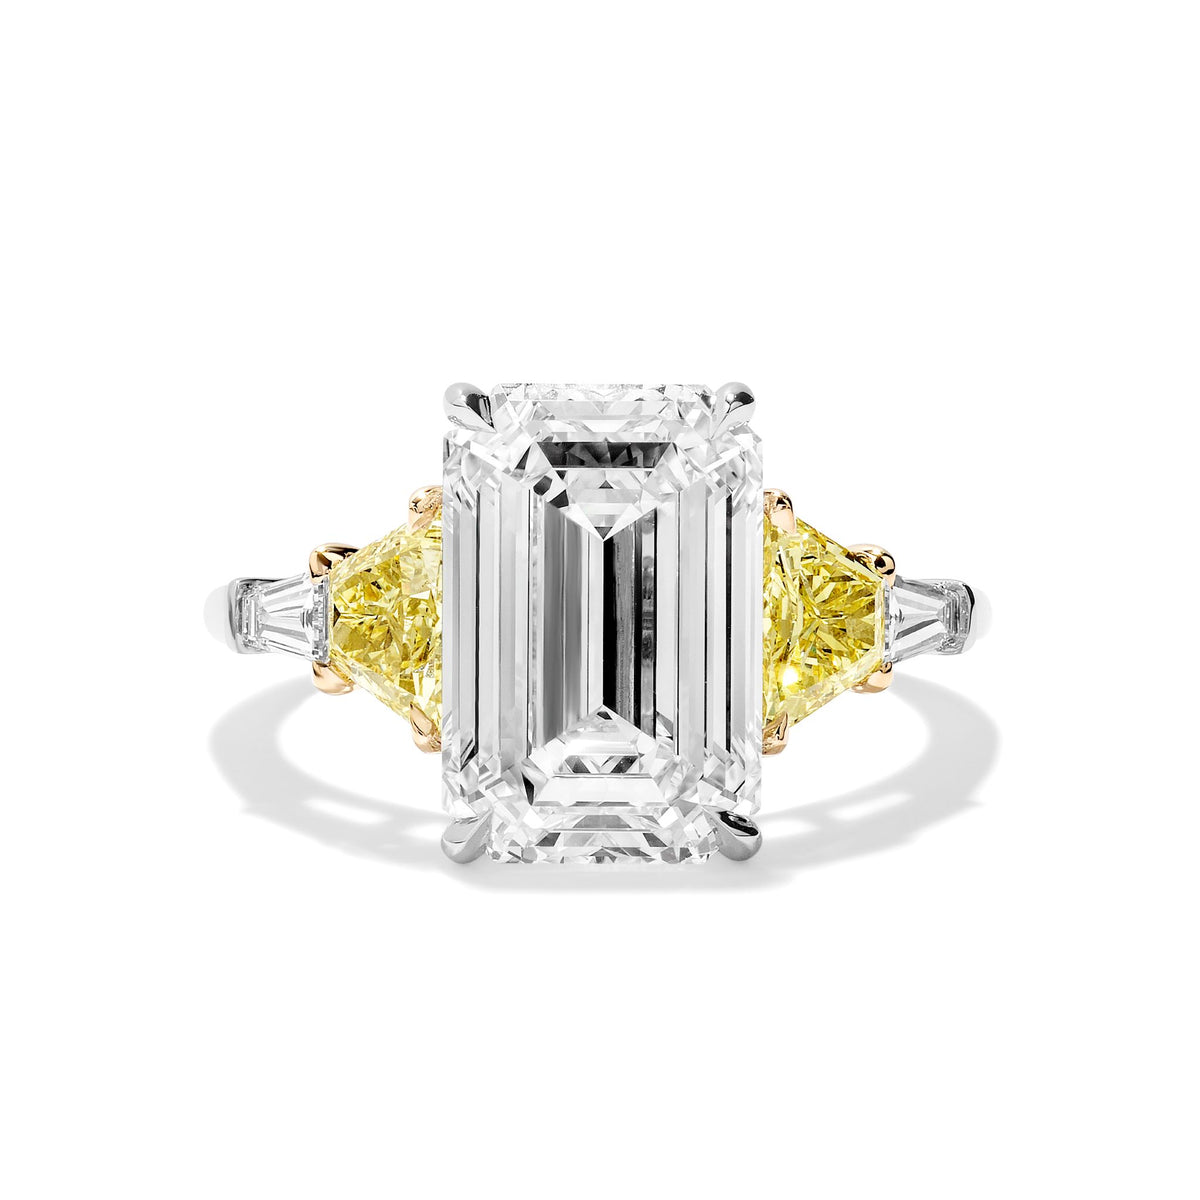 Emerald Cut Diamond with Yellow Diamond Trapezoids and Tapered Baguettes